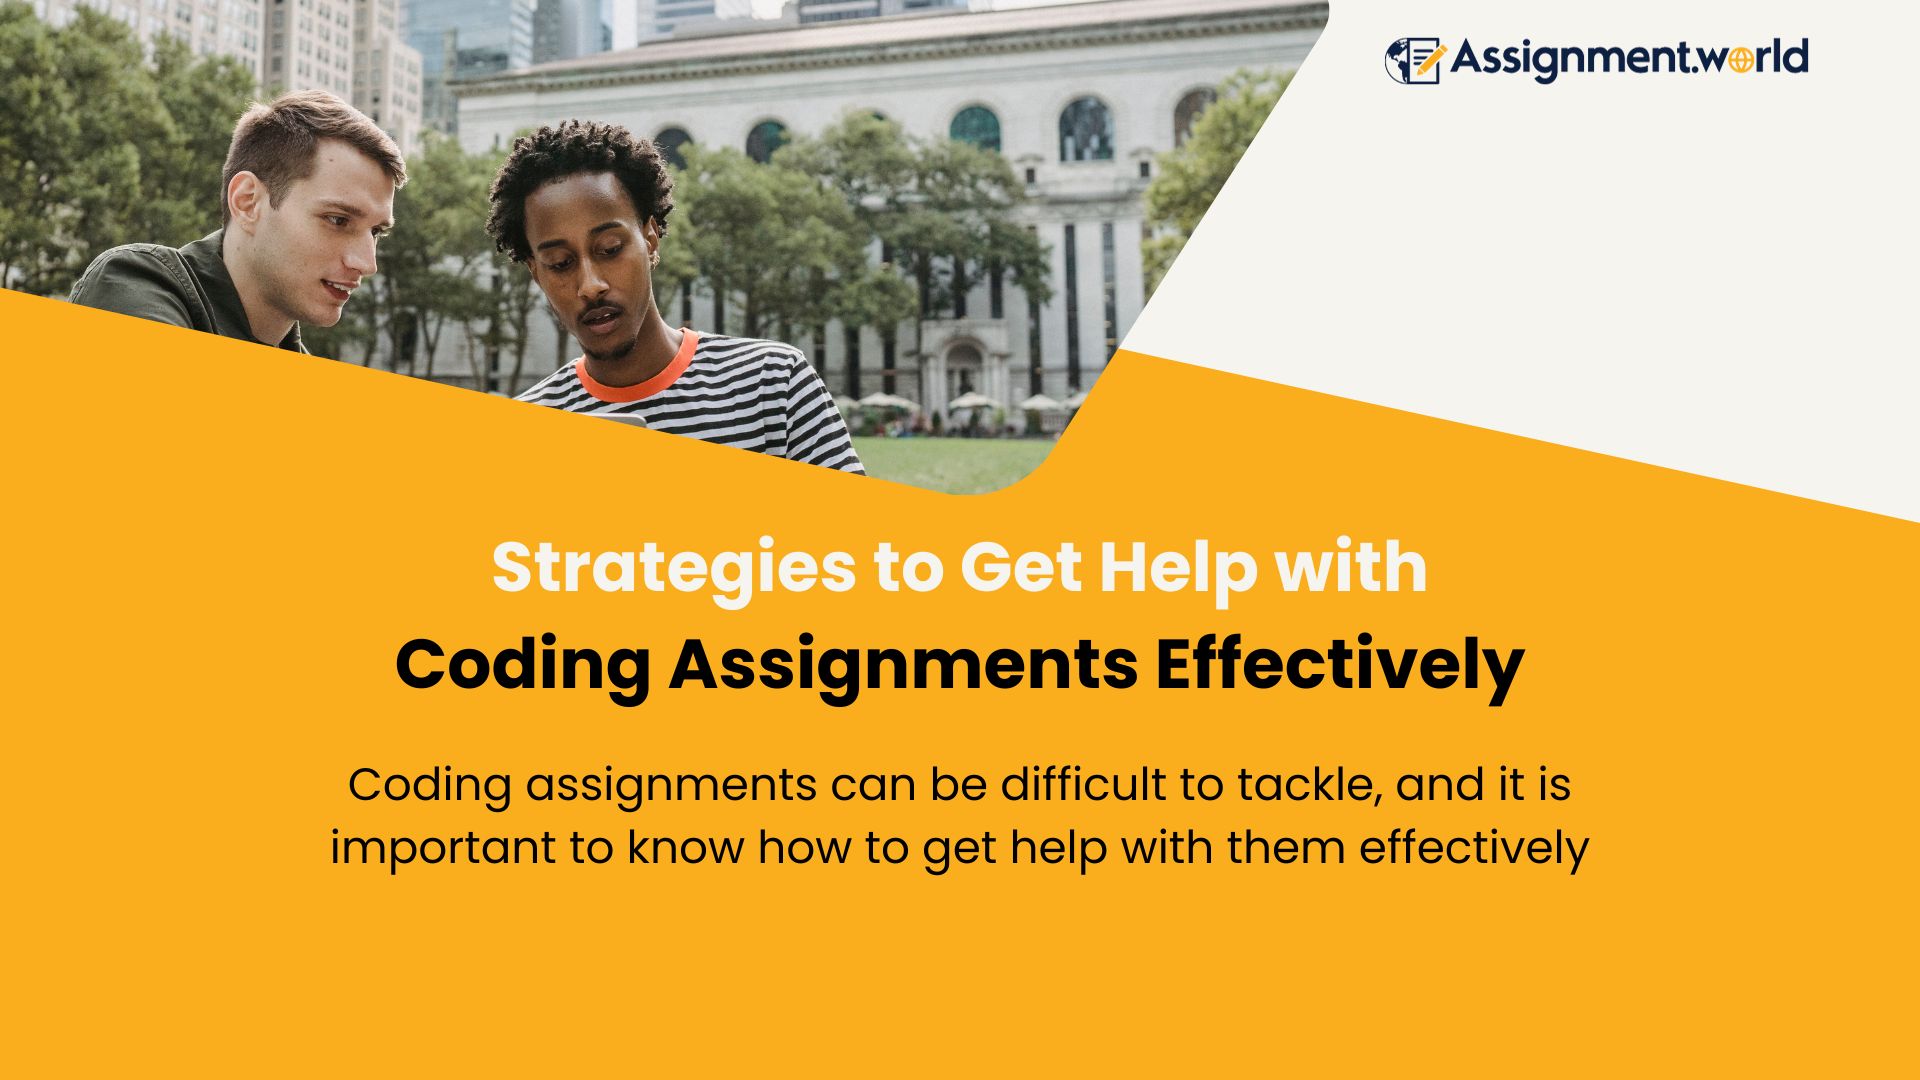 Strategies to Get Help with Coding Assignments Effectively